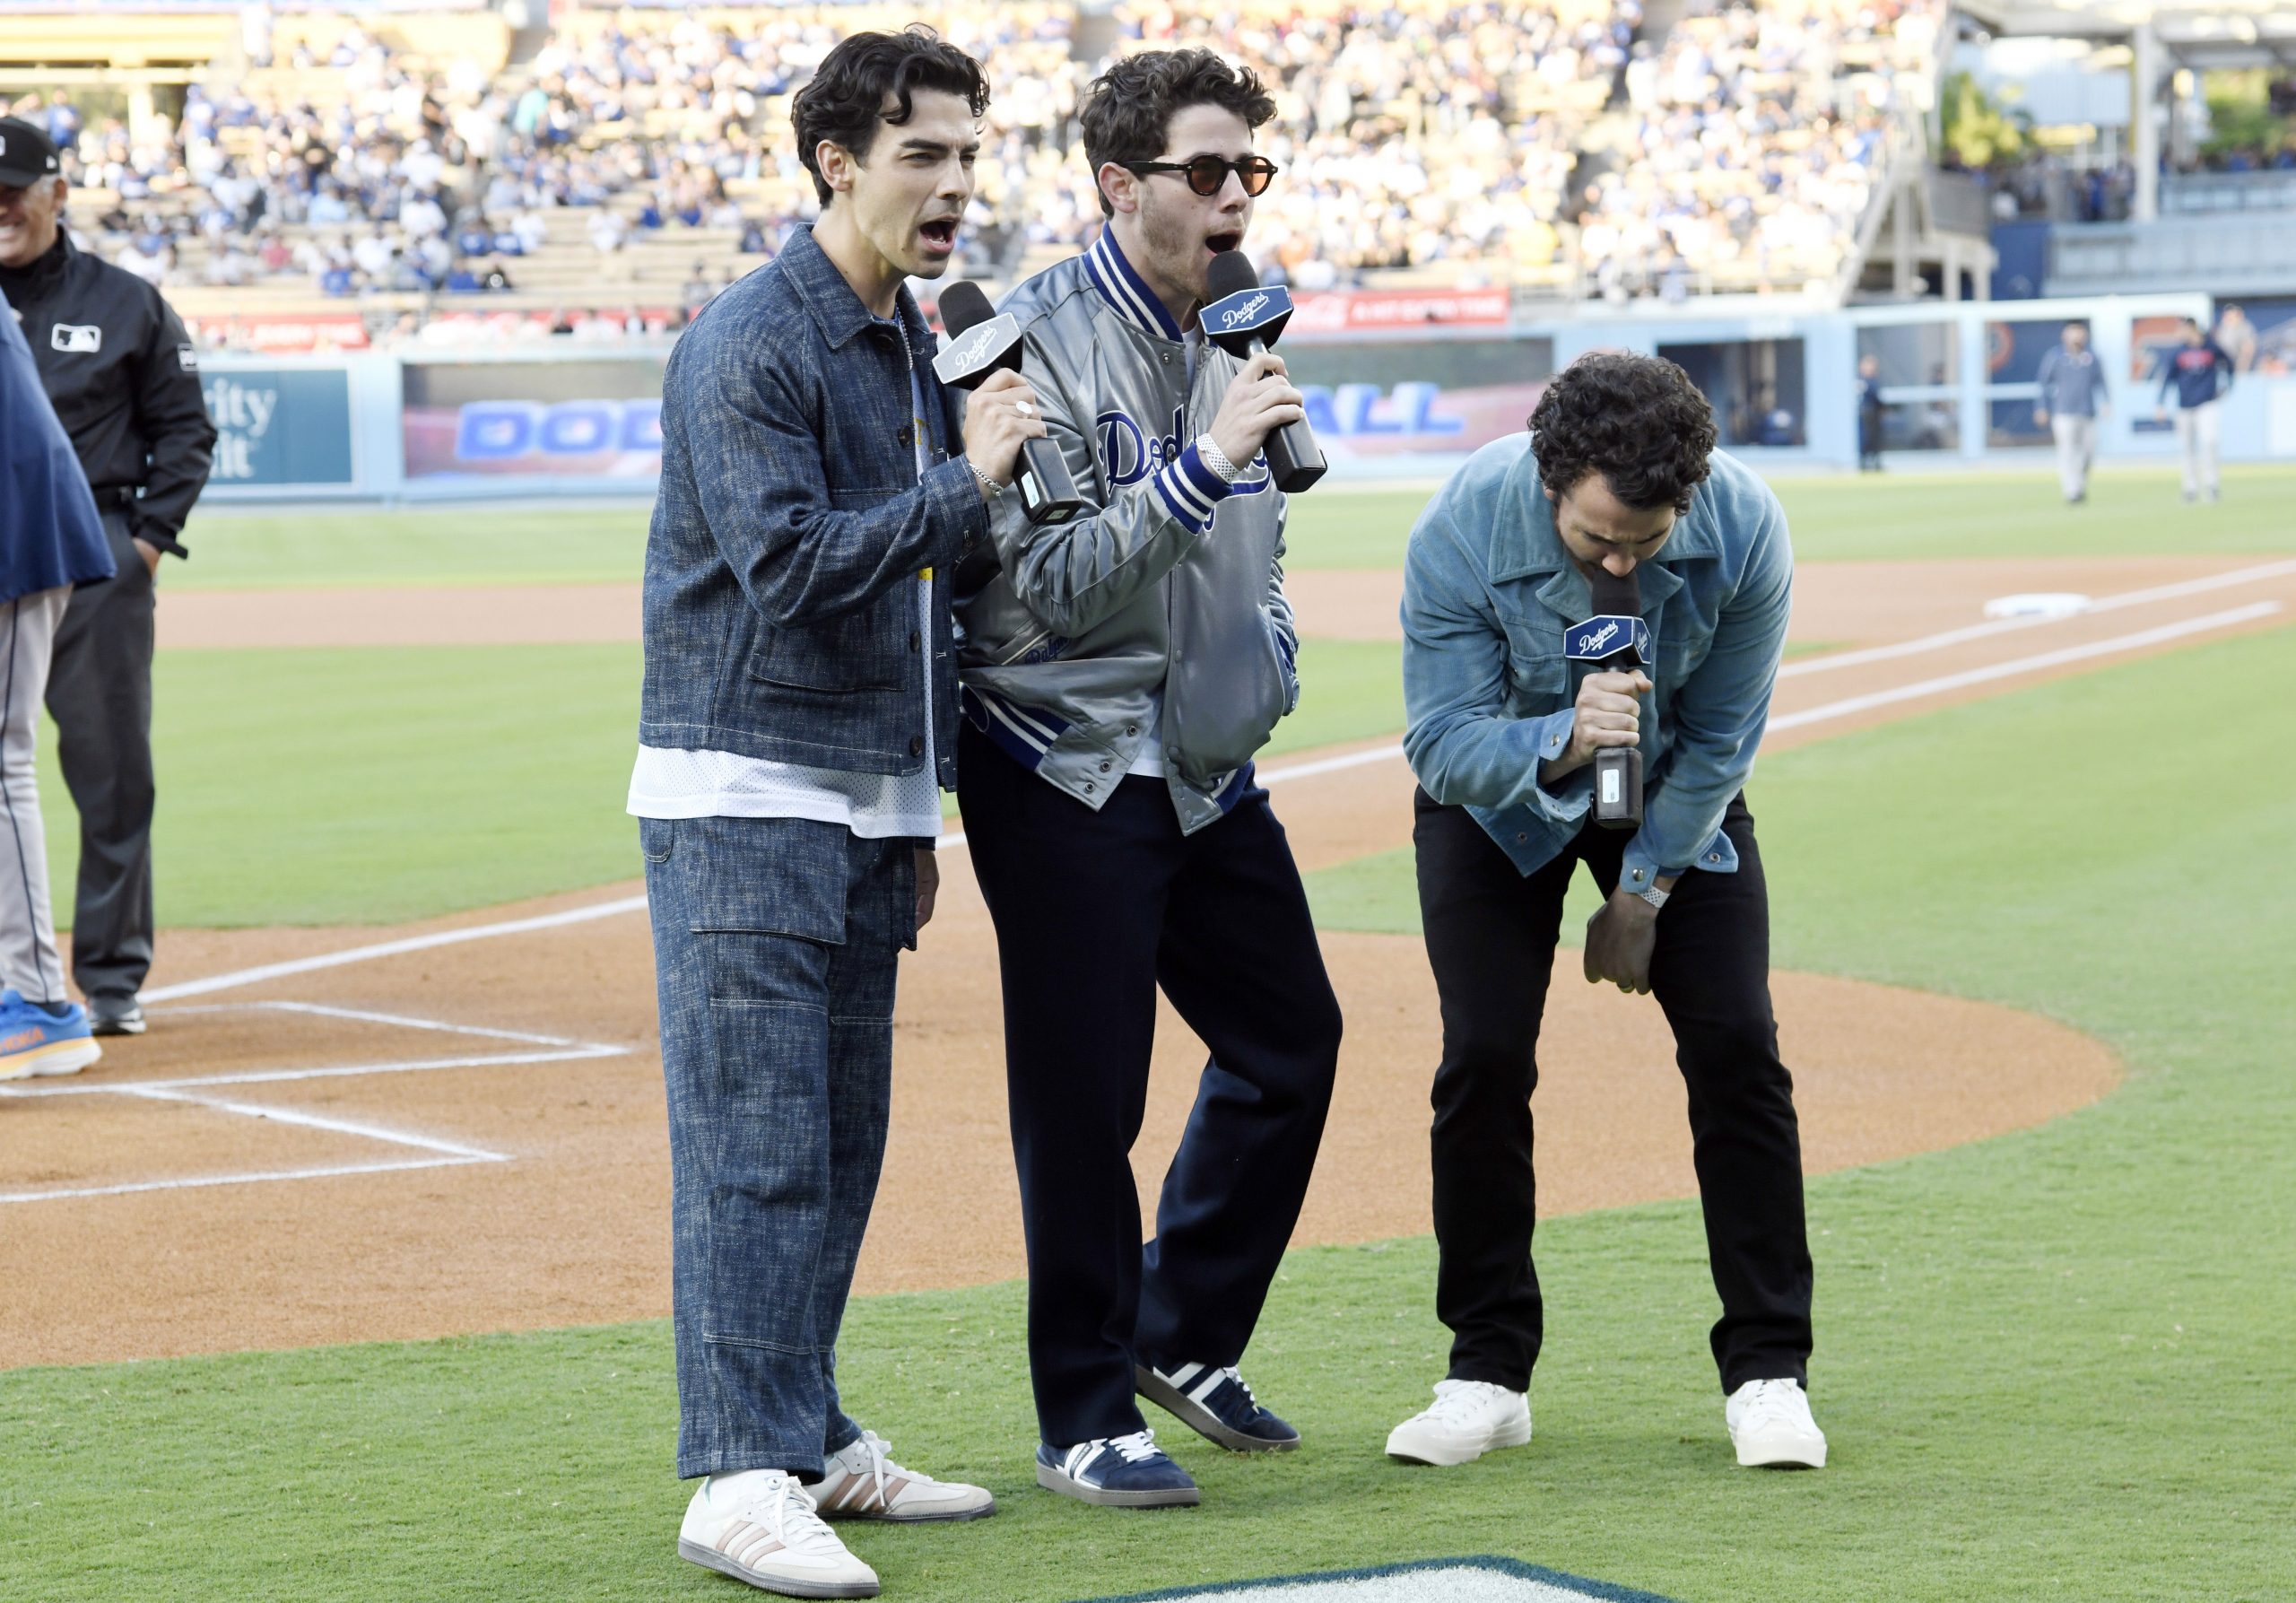 The Jonas Brothers perform in the baseball stadium with fans behind them